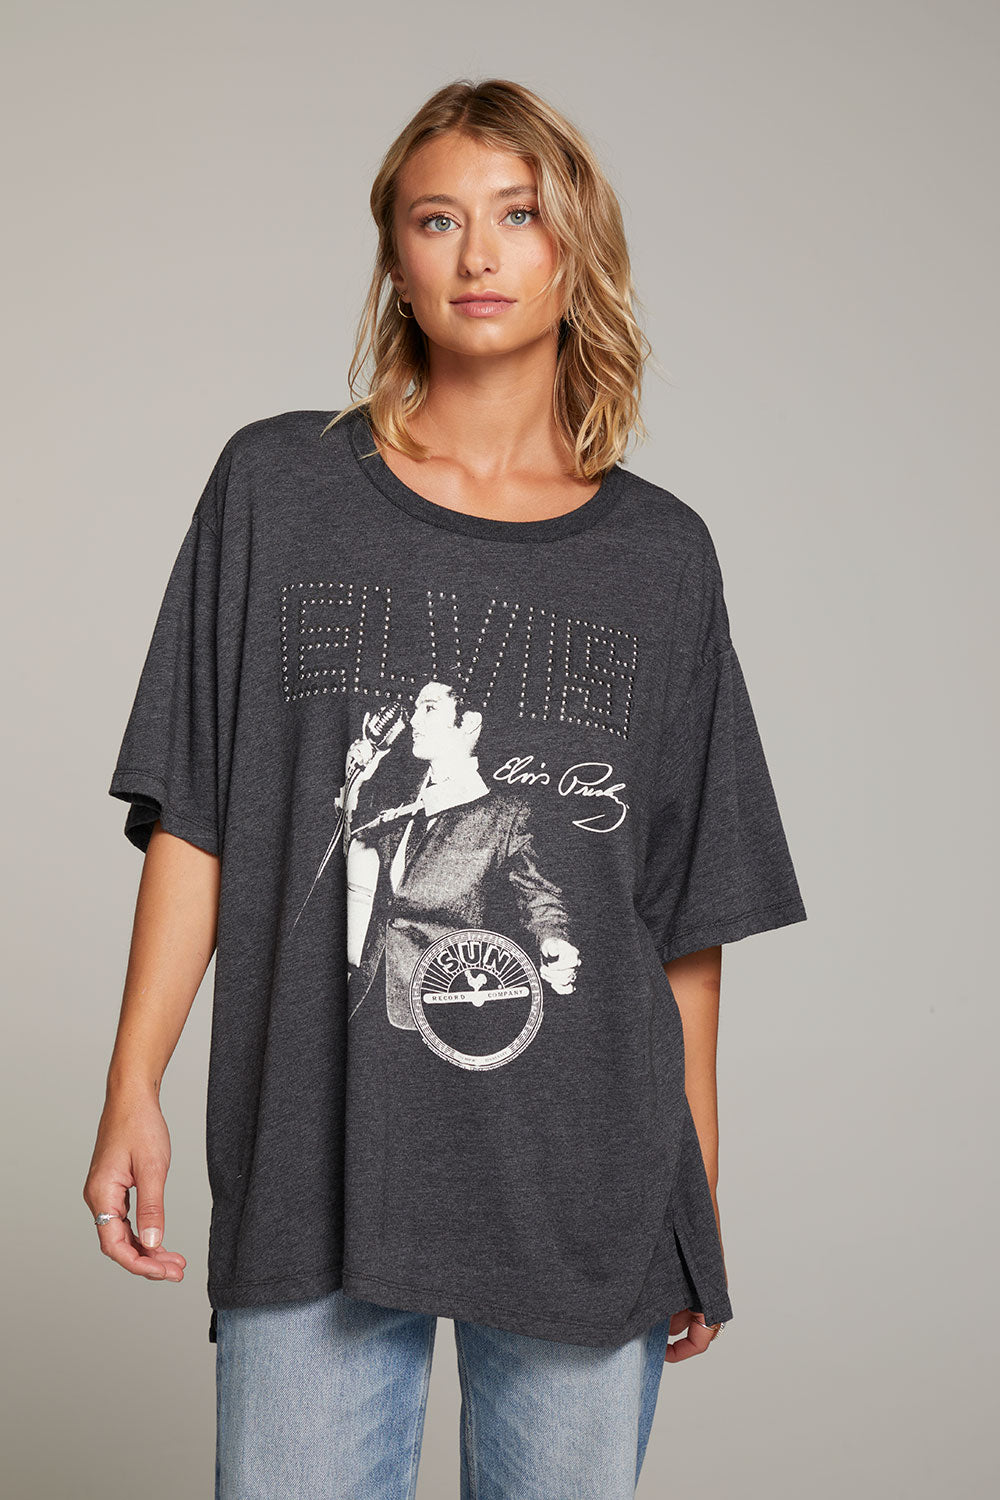 Sun Records Elvis Oversized Tee WOMENS chaserbrand